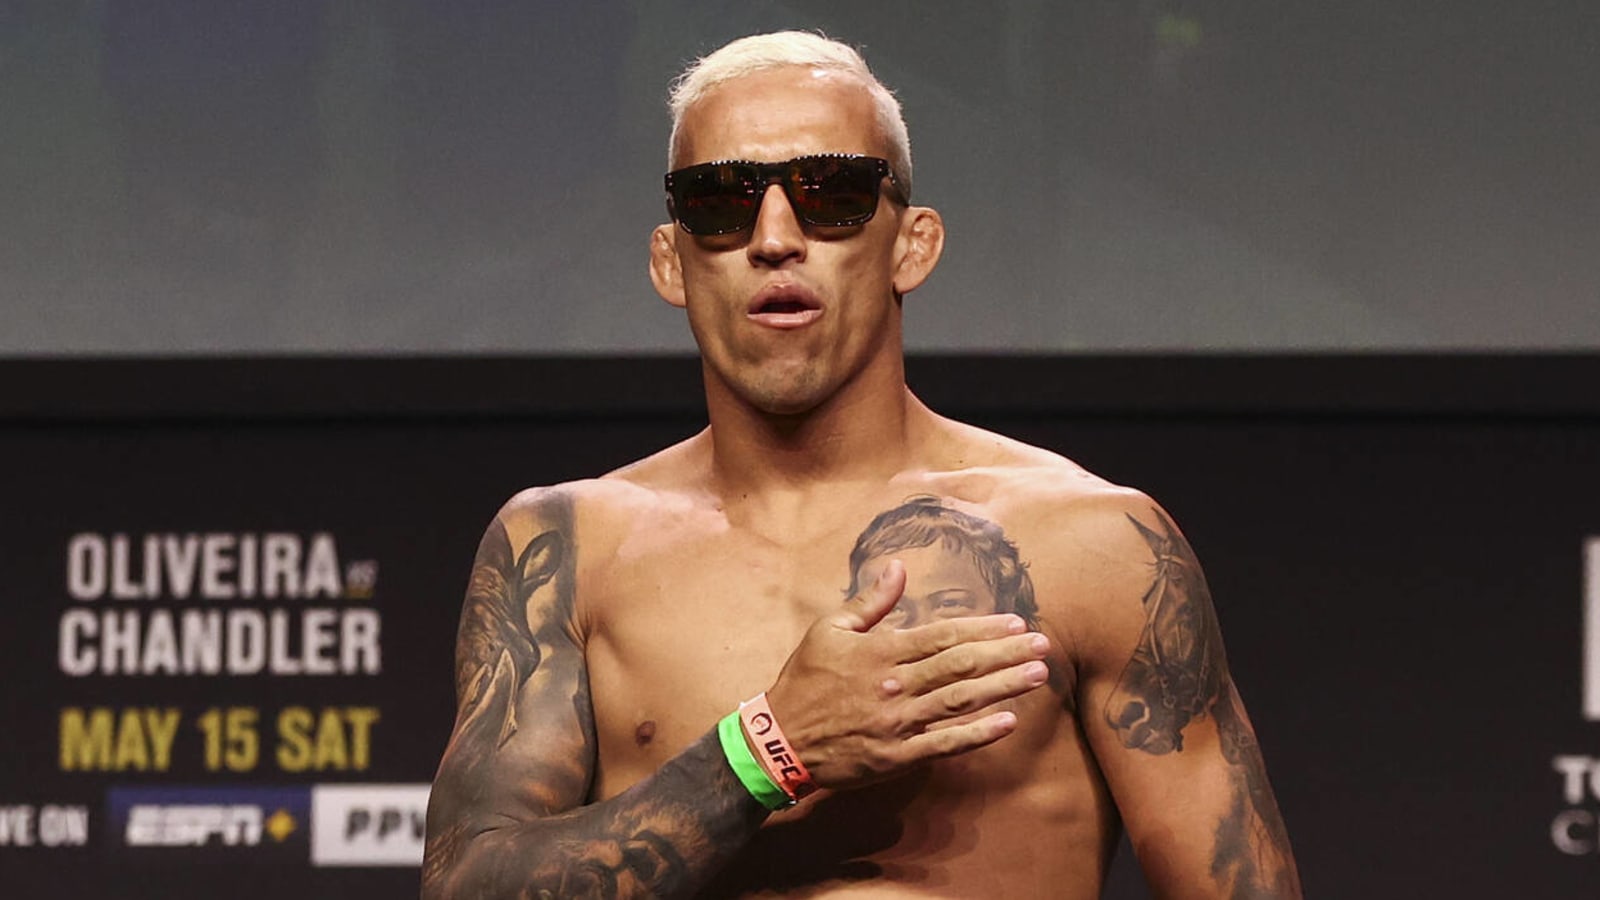 Charles Oliveira stripped of belt after missing weight